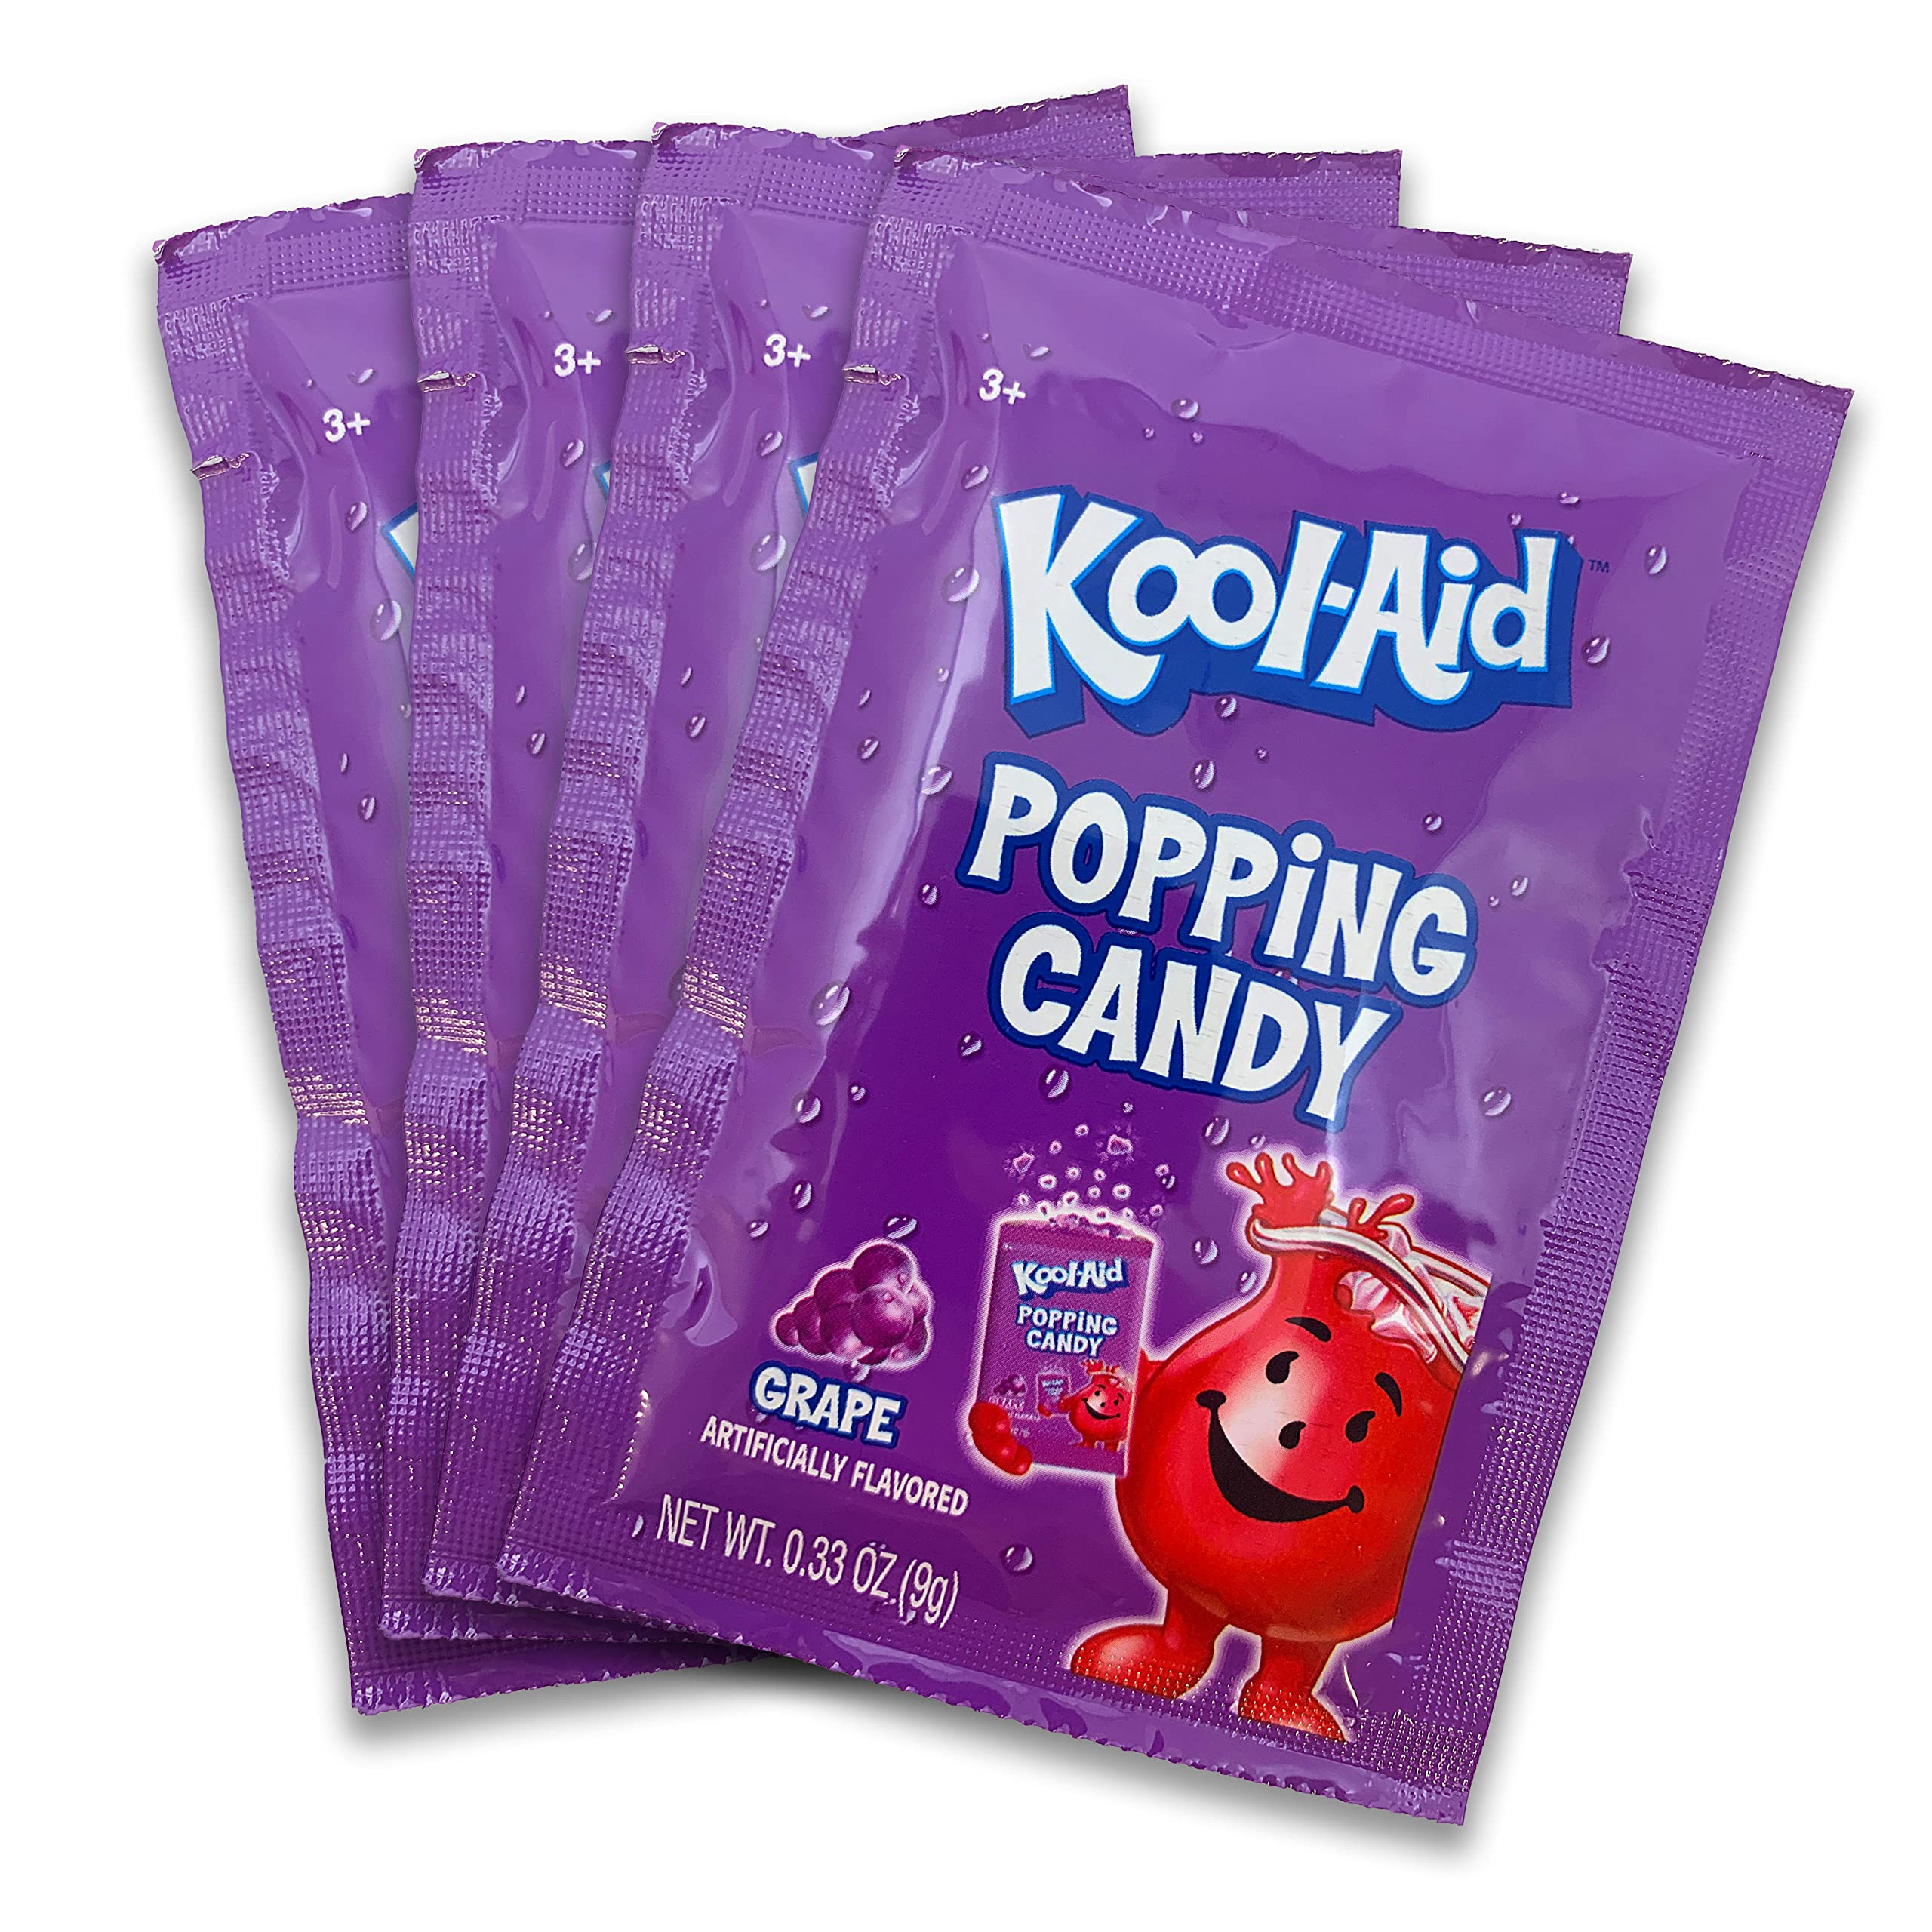 Kool-Aid Popping Candy Pouch - Grape 0.33oz (9g) 20CT